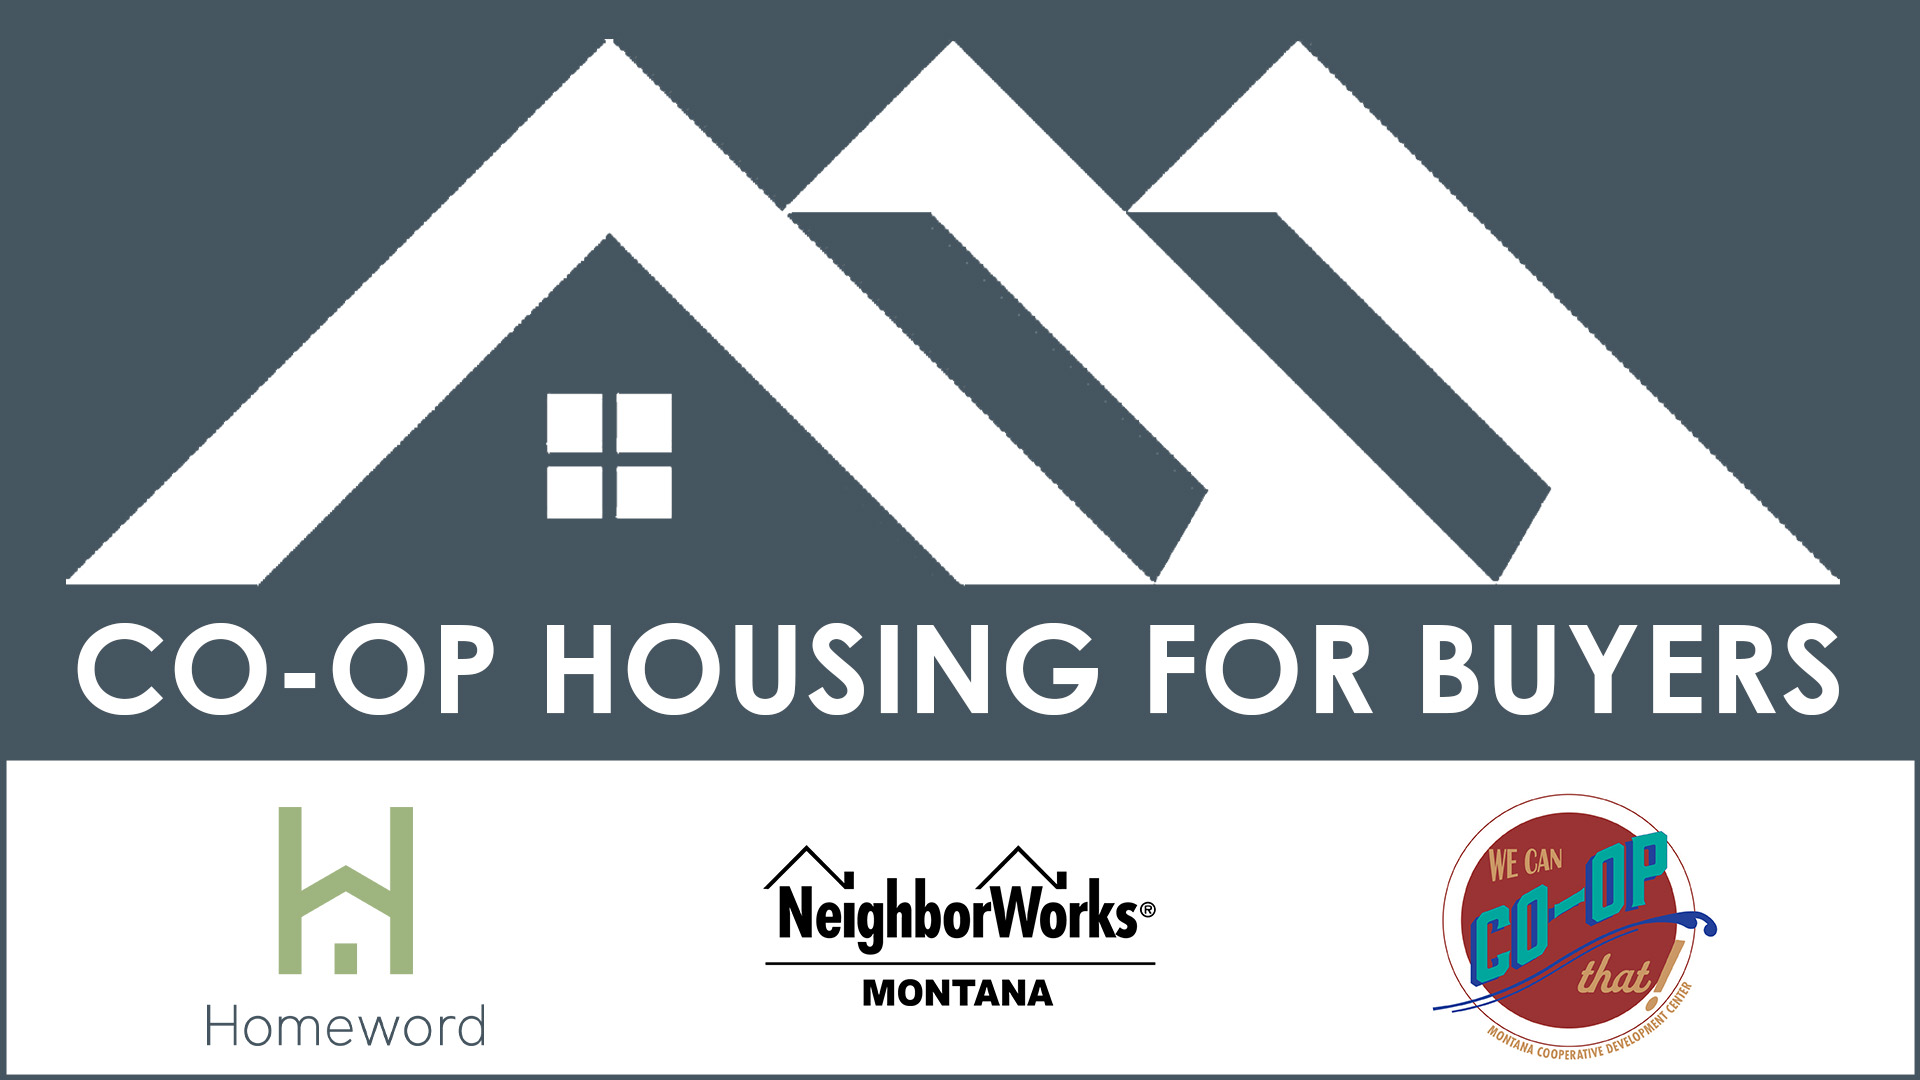 Co-Op Housing for Buyers, sponsored by Homeword, NeighborWorks Montana and the Montana Cooperative Development Center